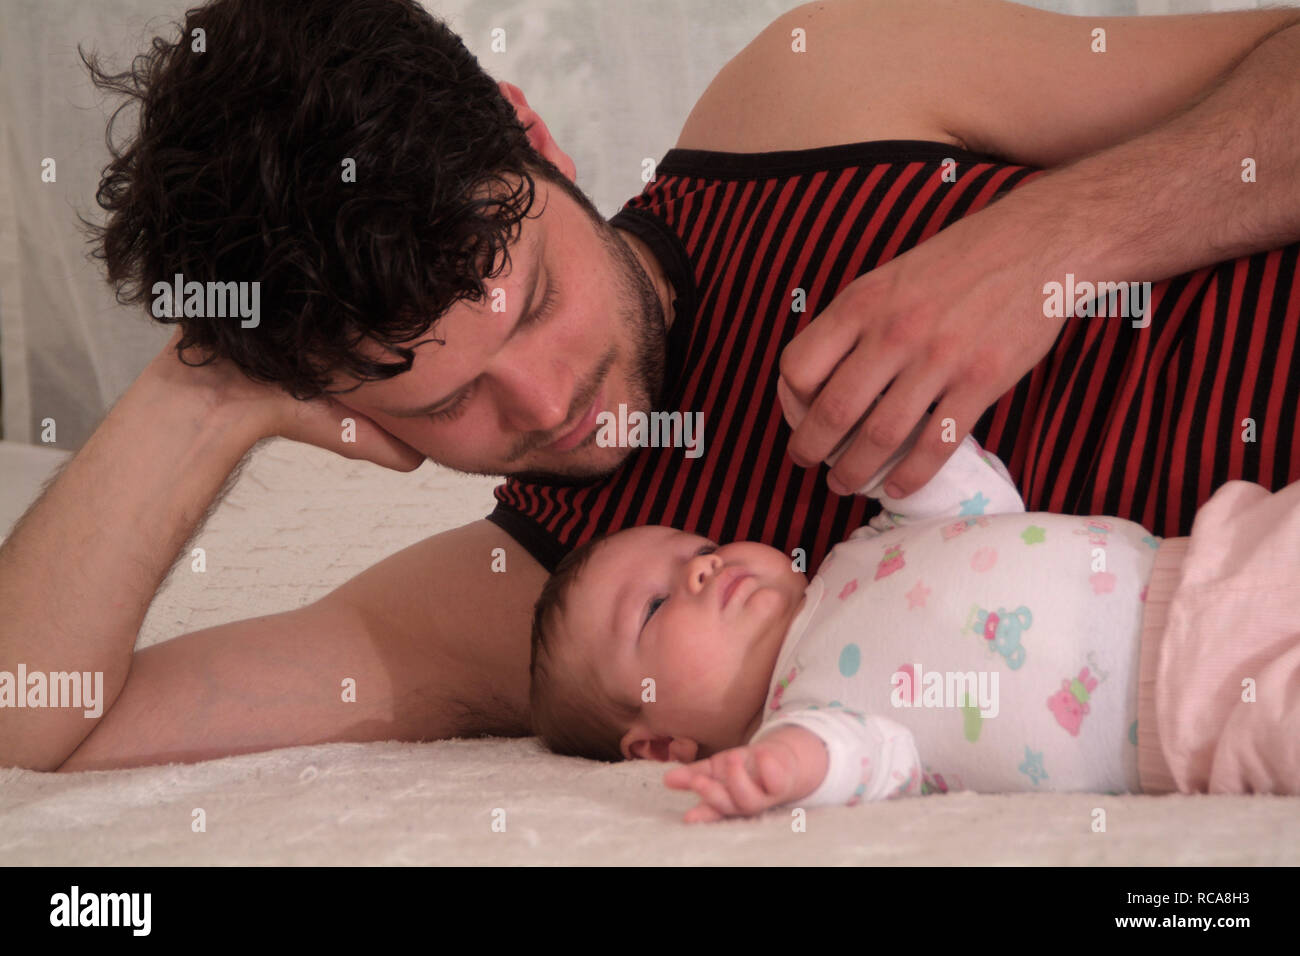 Vater kümmert sich um Säugling | father with baby taking care Stock Photo